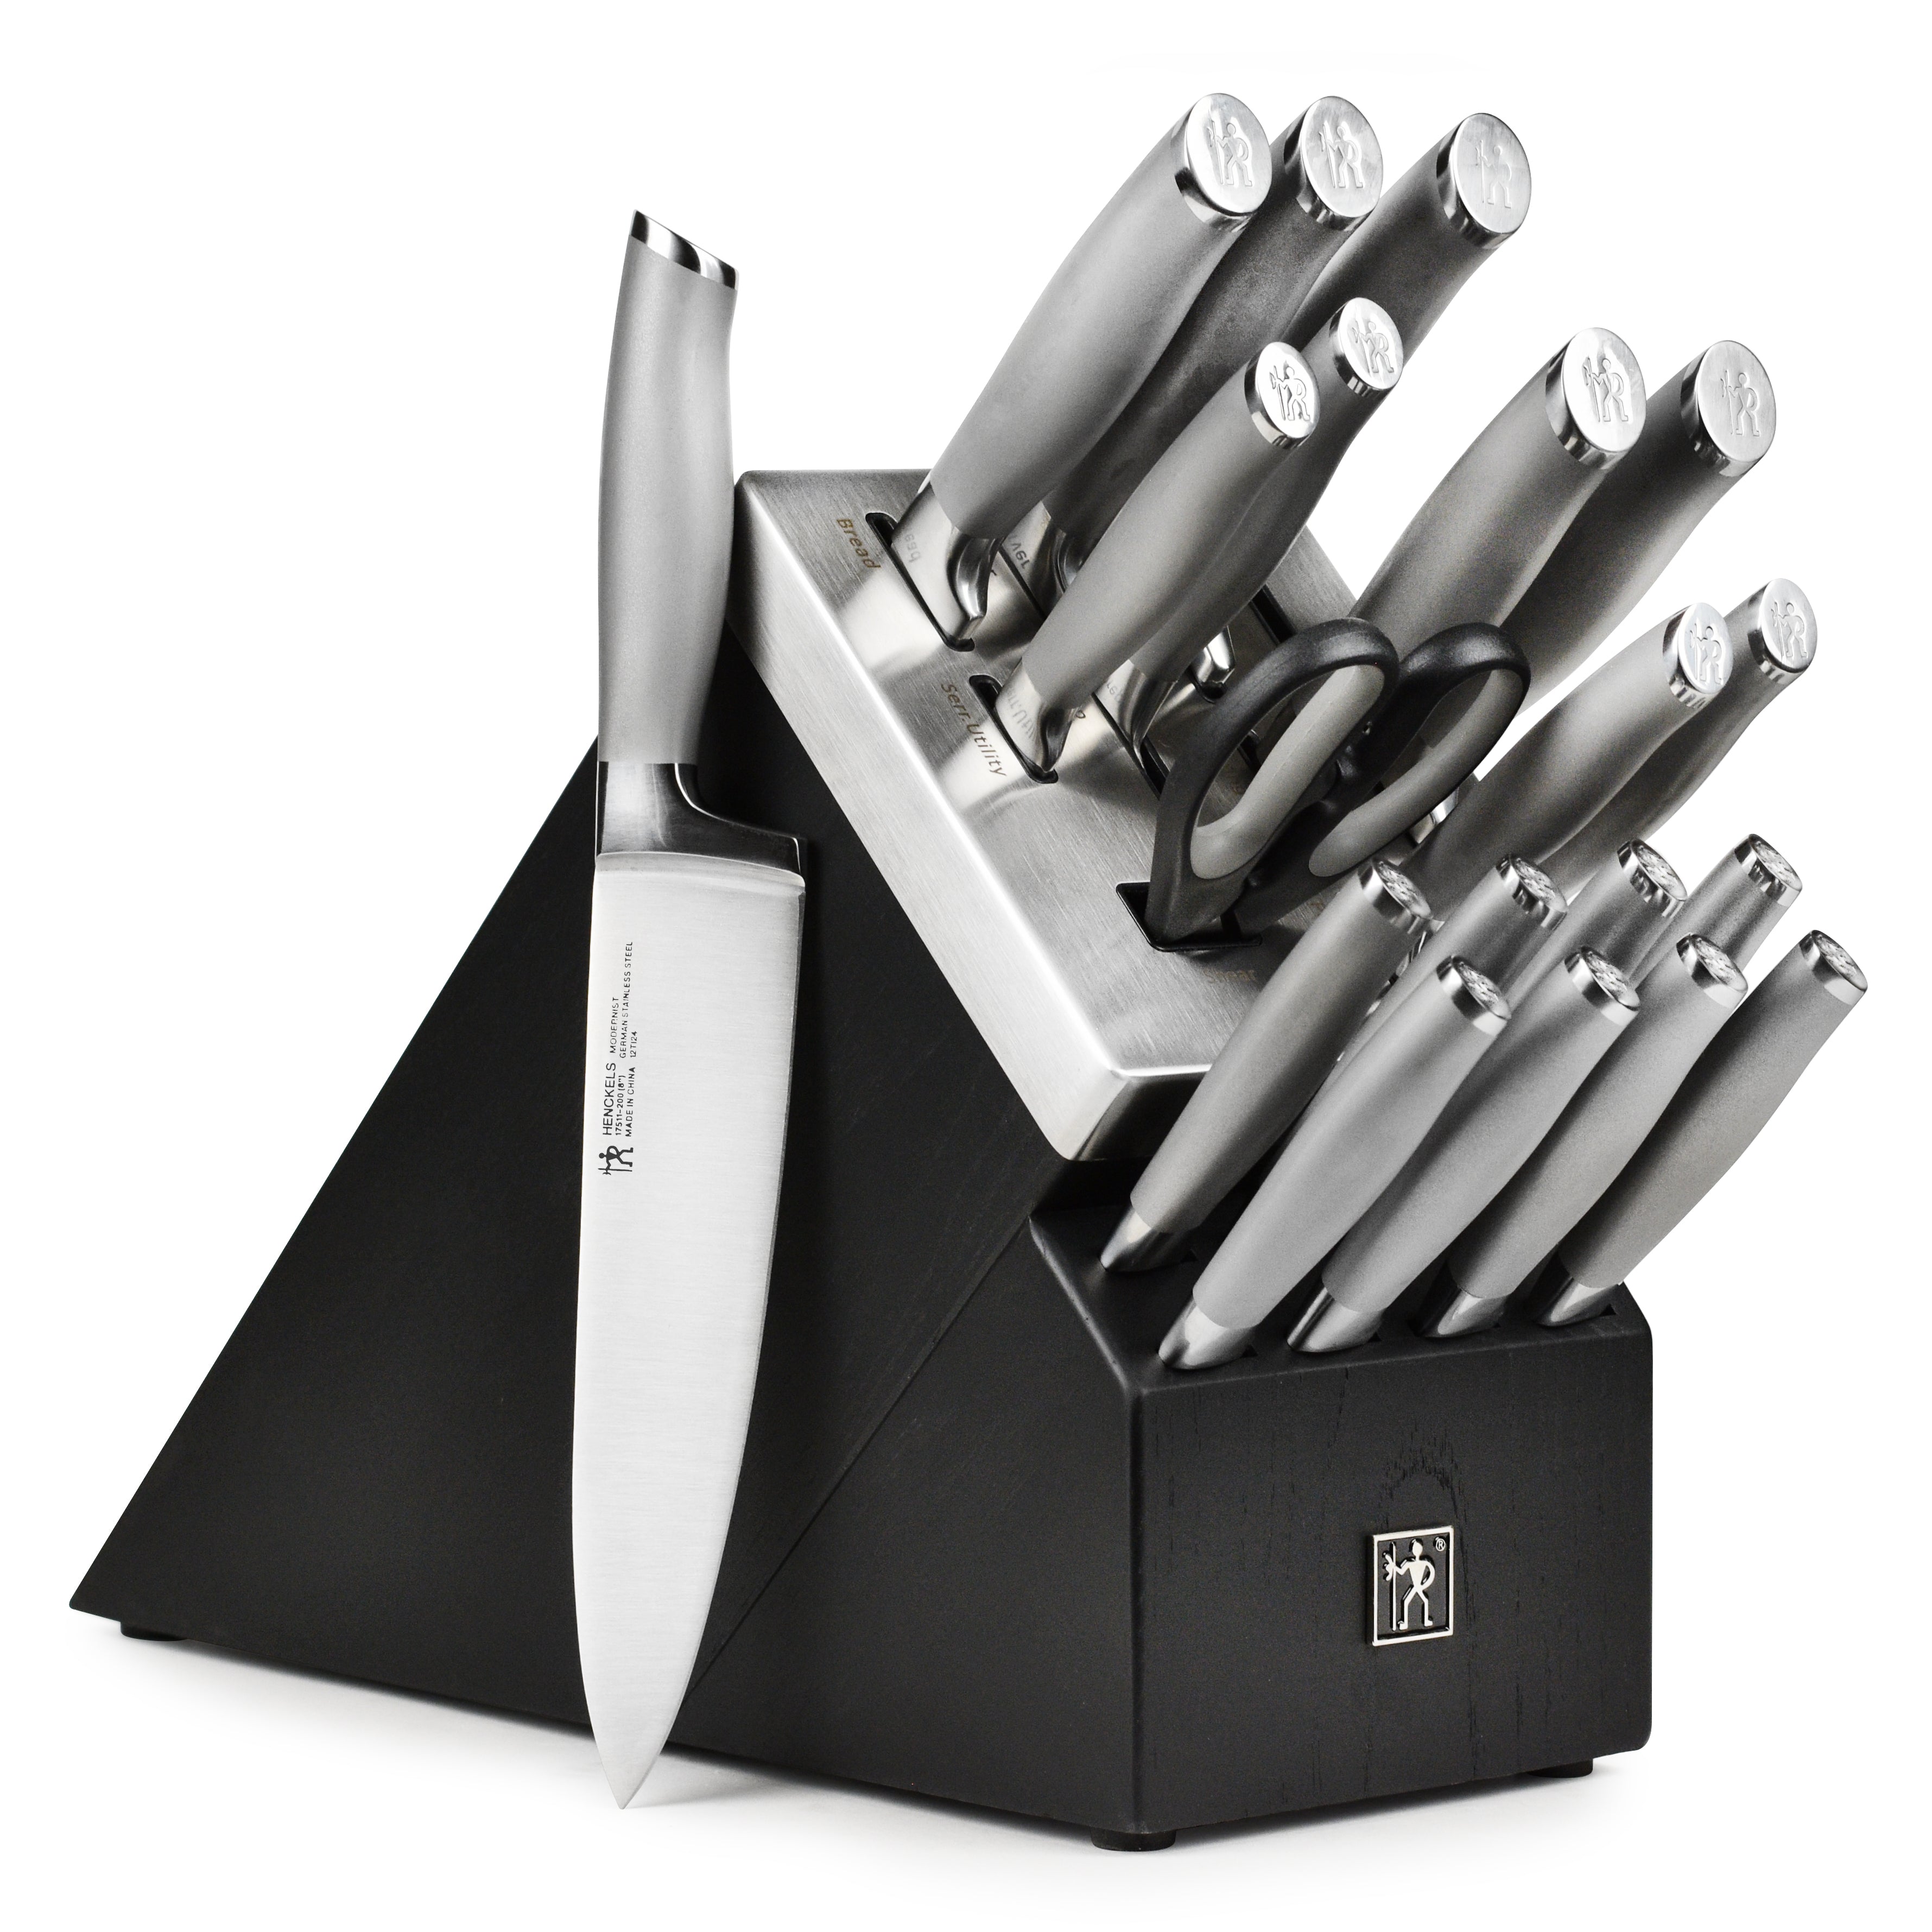 Henckels Modernist 20 Piece Self Sharpening Knife Set – Cutlery and More